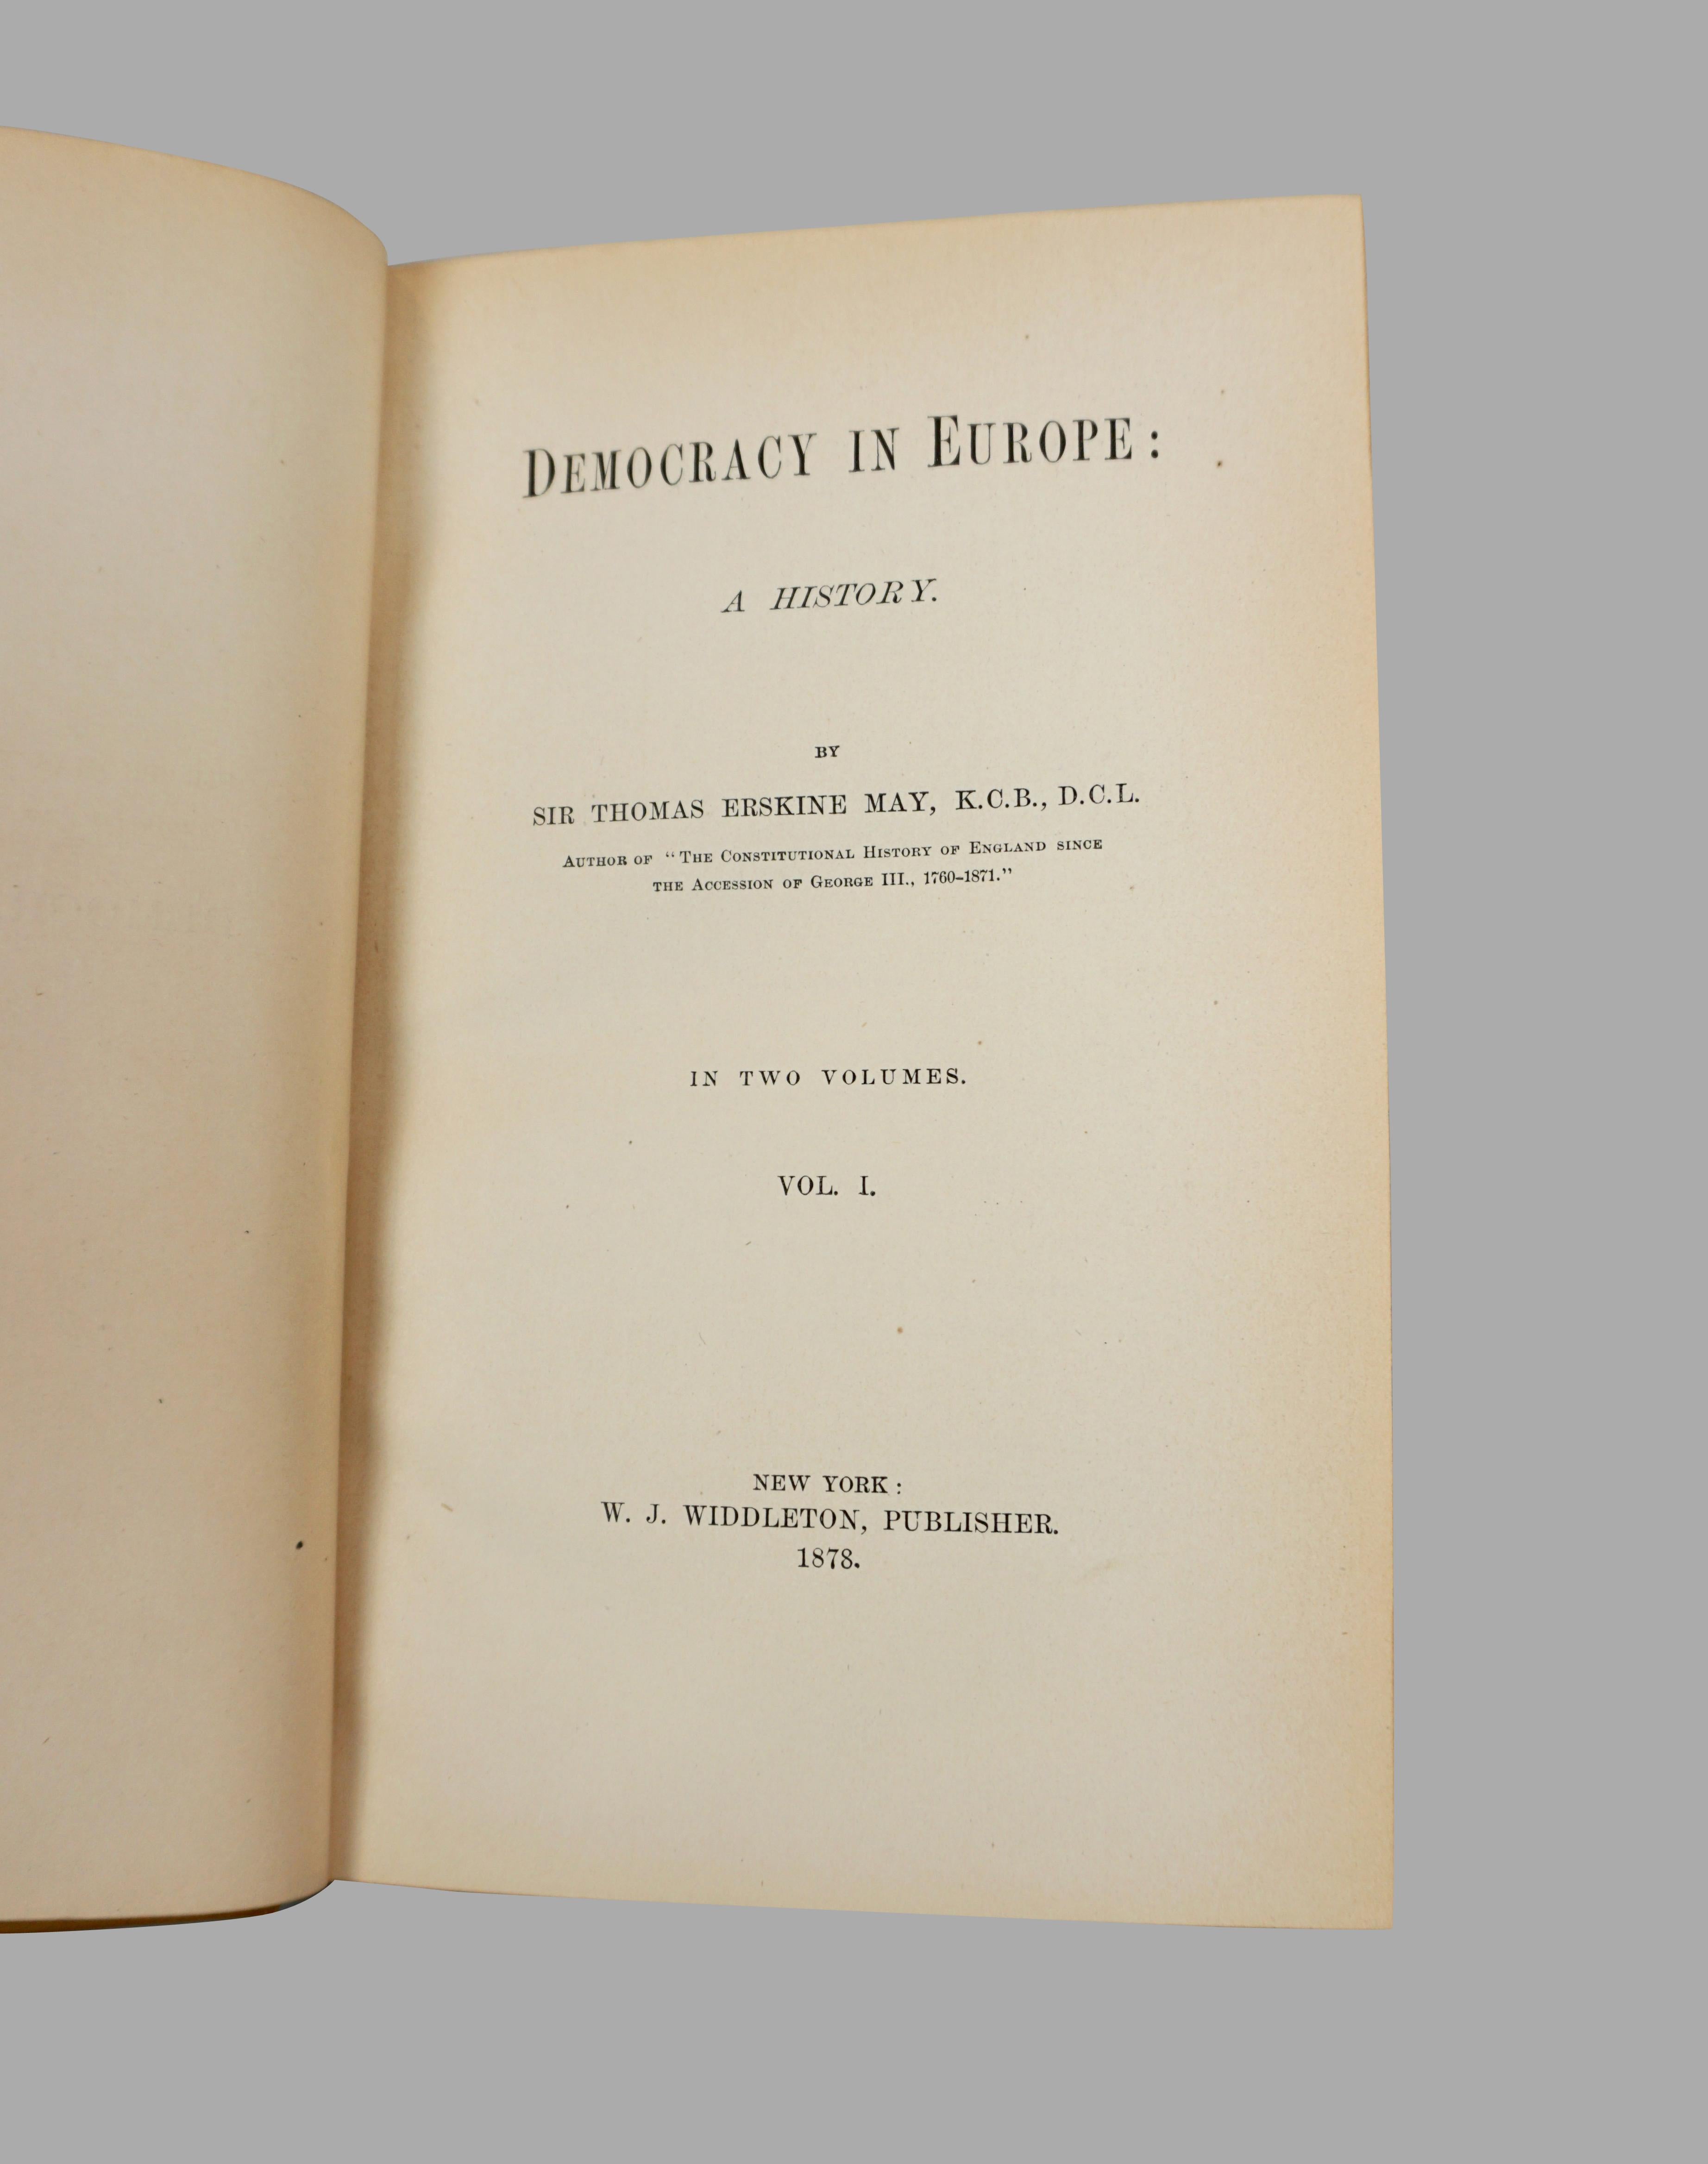 Democracy in Europe by Sir Thomas Erskine May, K.C.B. in 2 volumes, each 3/4 leather bound book with marbleized endpapers and pages, published by W.J. Widdleton New York 1878. 
May was a well known English constitutional theorist and Clerk of the